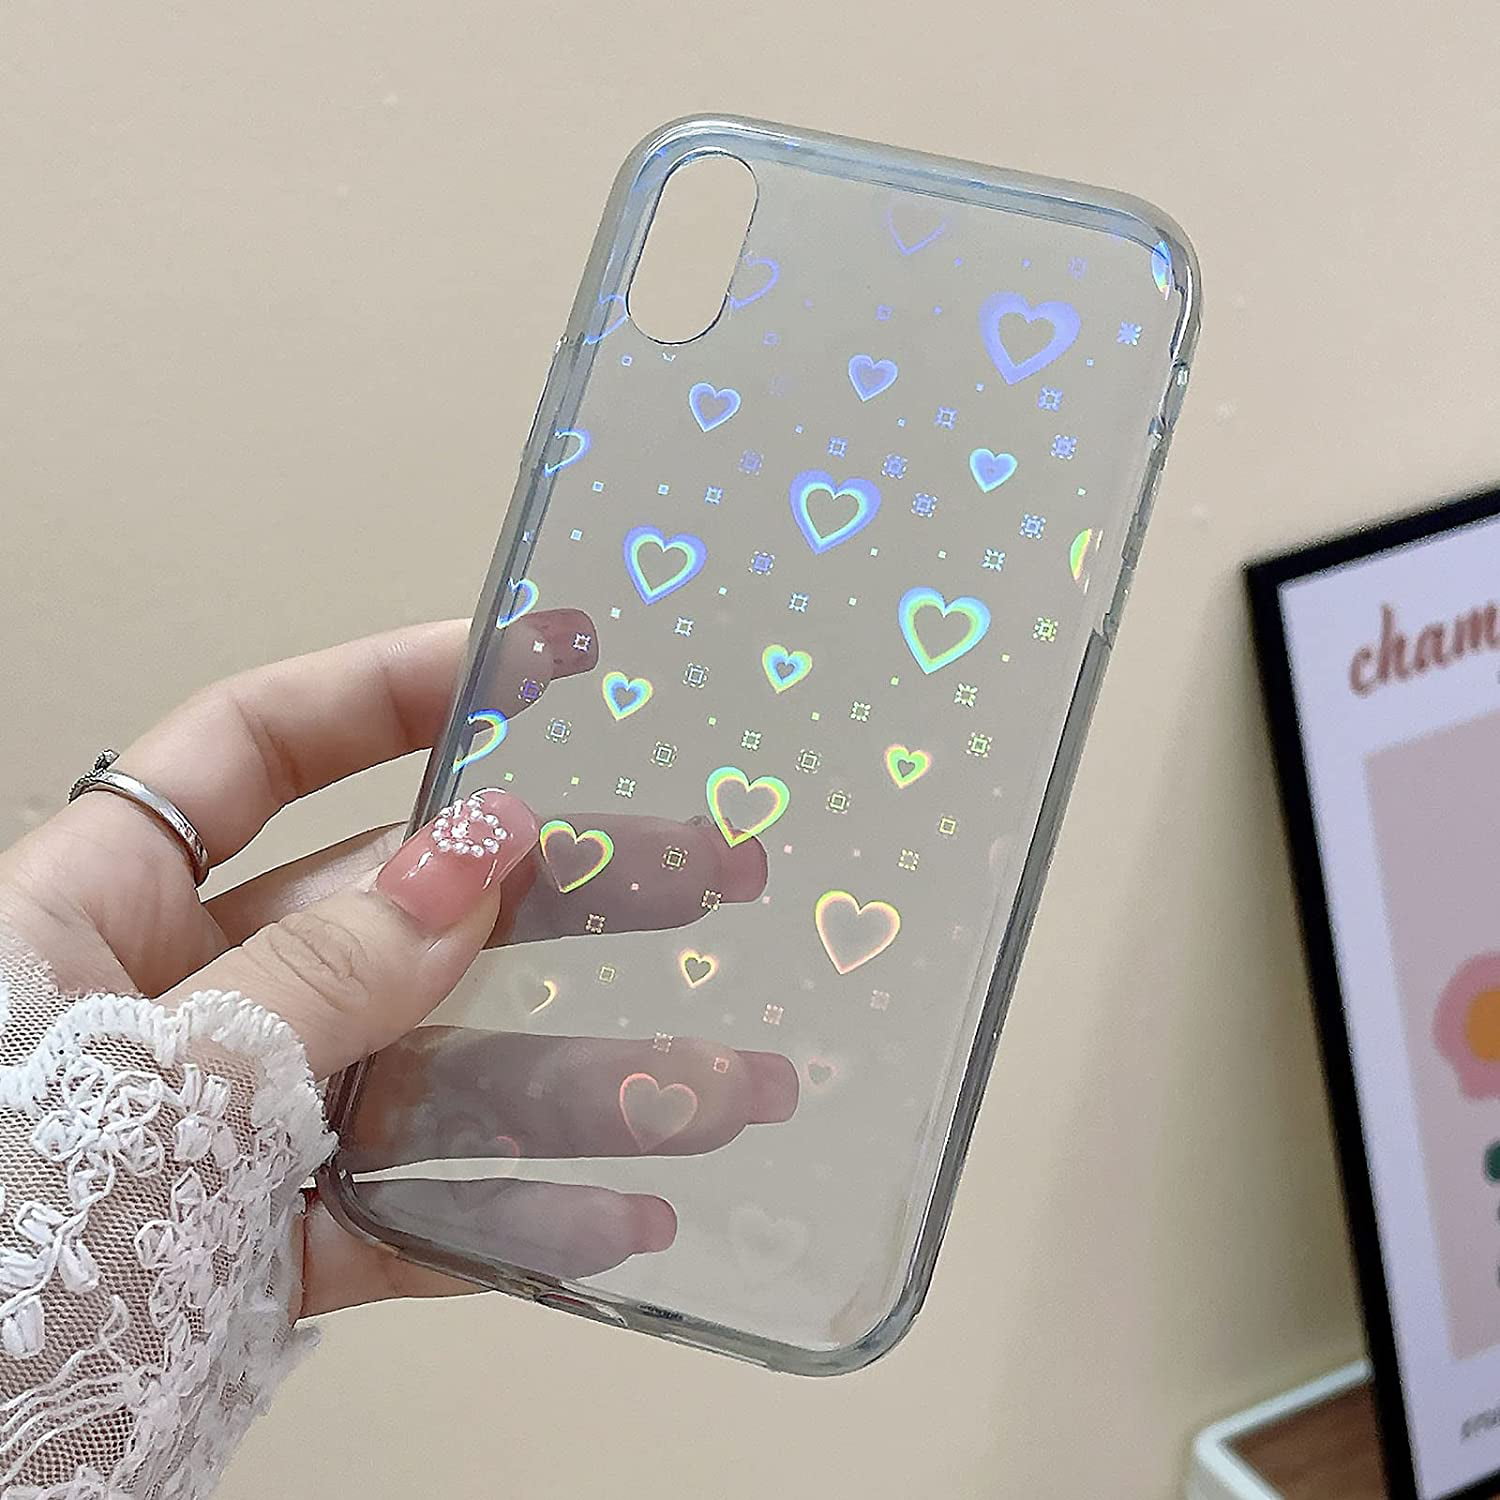 Hzcwxqh Cute Glitter Clear Laser Love Hearts Phone Case Compatible with iPhone SE 2020, iPhone 8, iPhone 7, Slim Thin Soft Shockproof Cover for